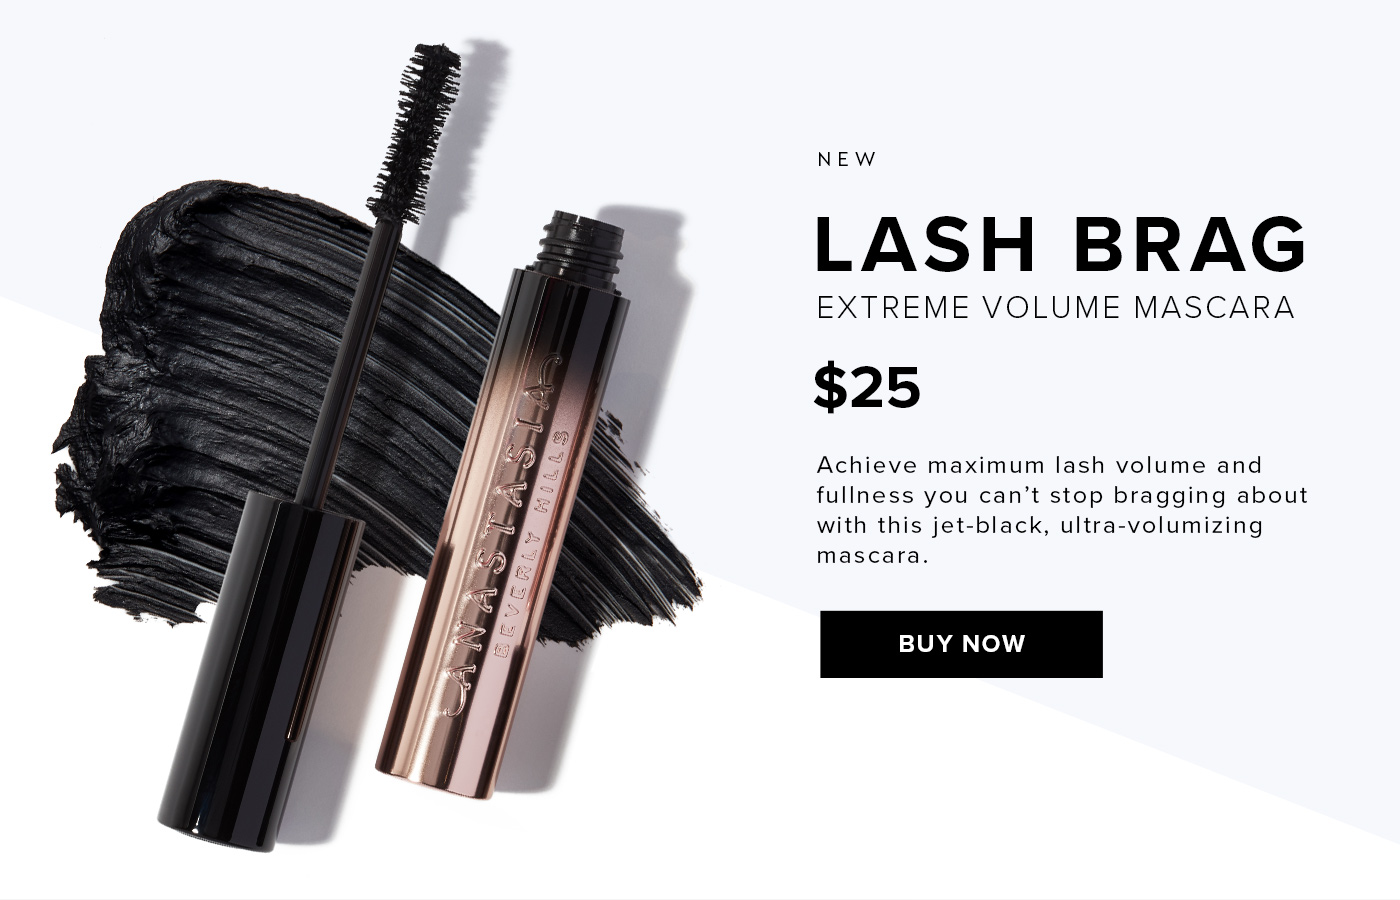 NEW LASH BRAG EXTREME VOLUME MASCARA. $25. Achieve maximum lash volume and fullness you can''t stop bragging about with this jet-black, ultra-volumizing mascara. BUY NOW.